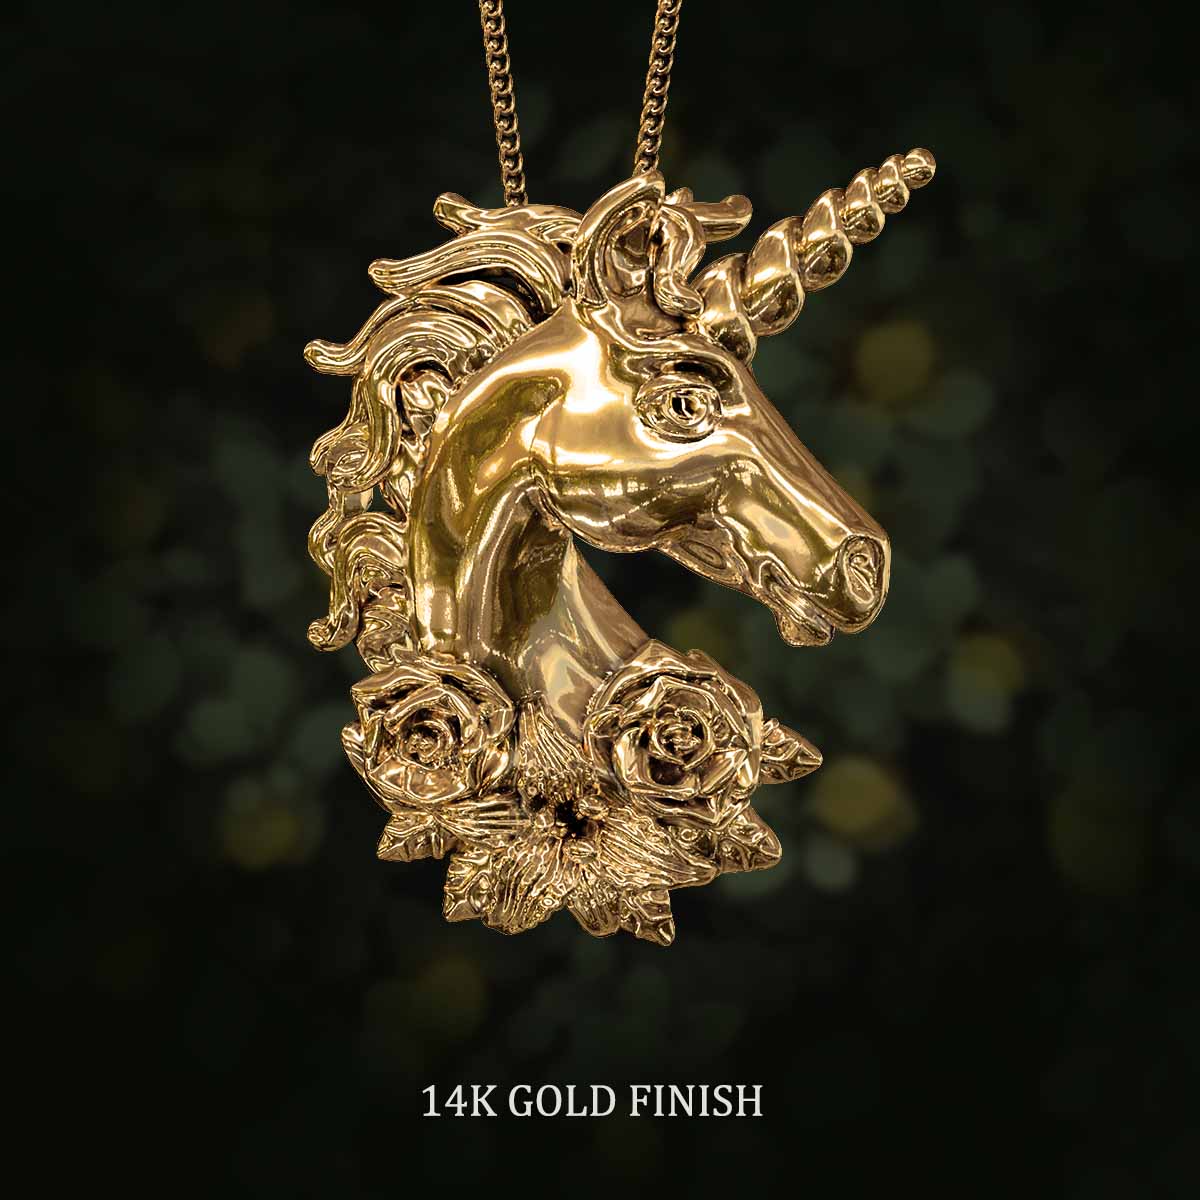    14k-Gold-Finish-Unicorn-With-Flowers-Pendant-Jewelry-For-Necklace